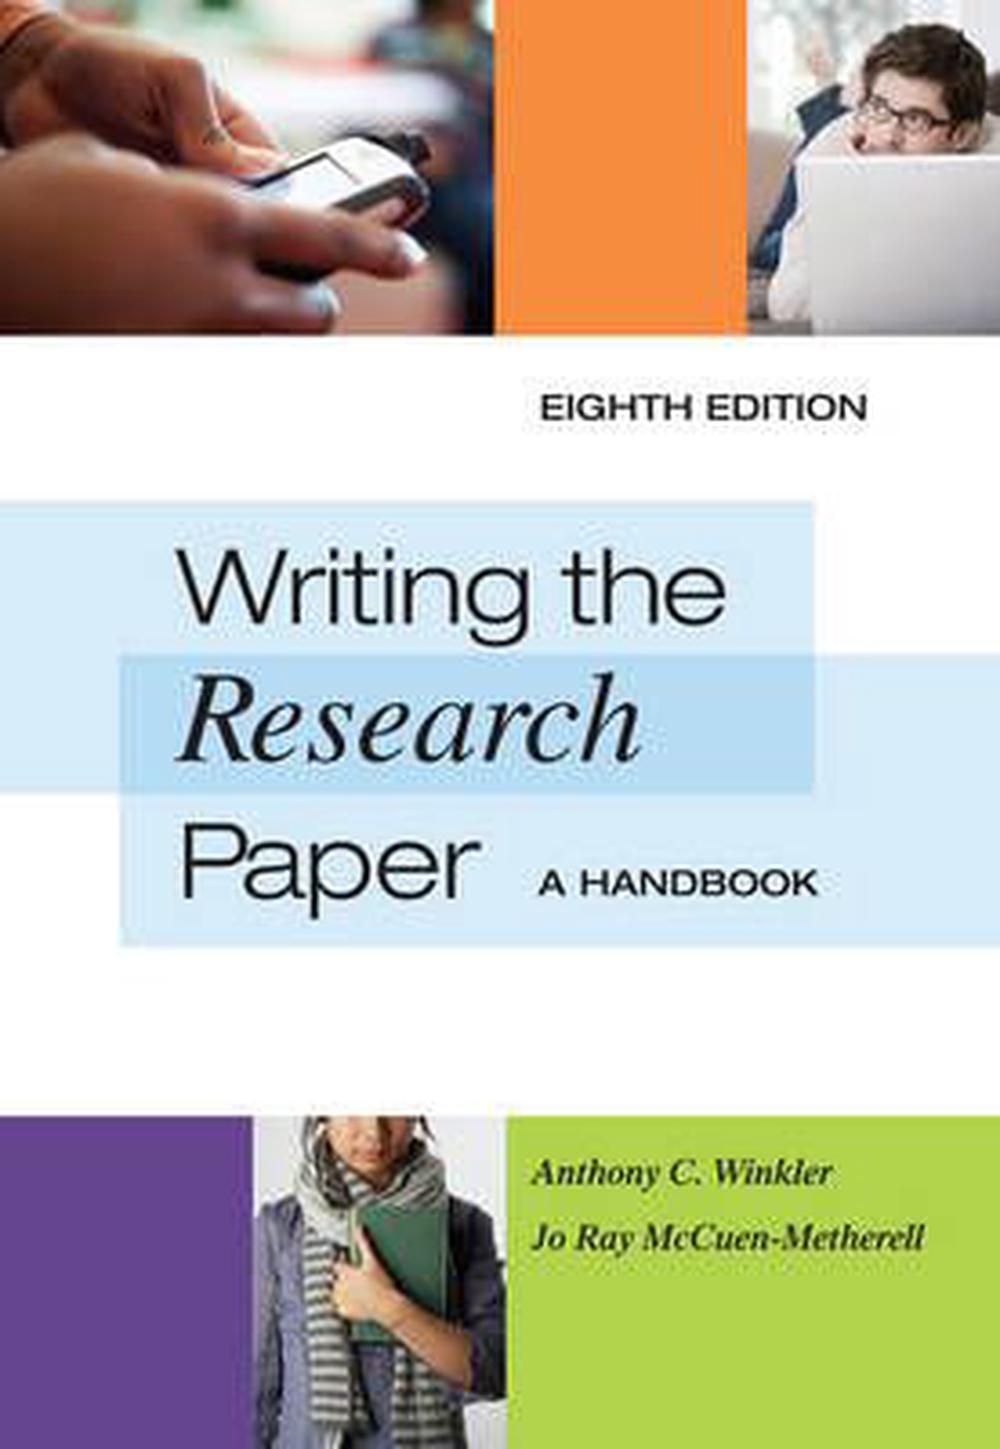 writing the research paper a handbook